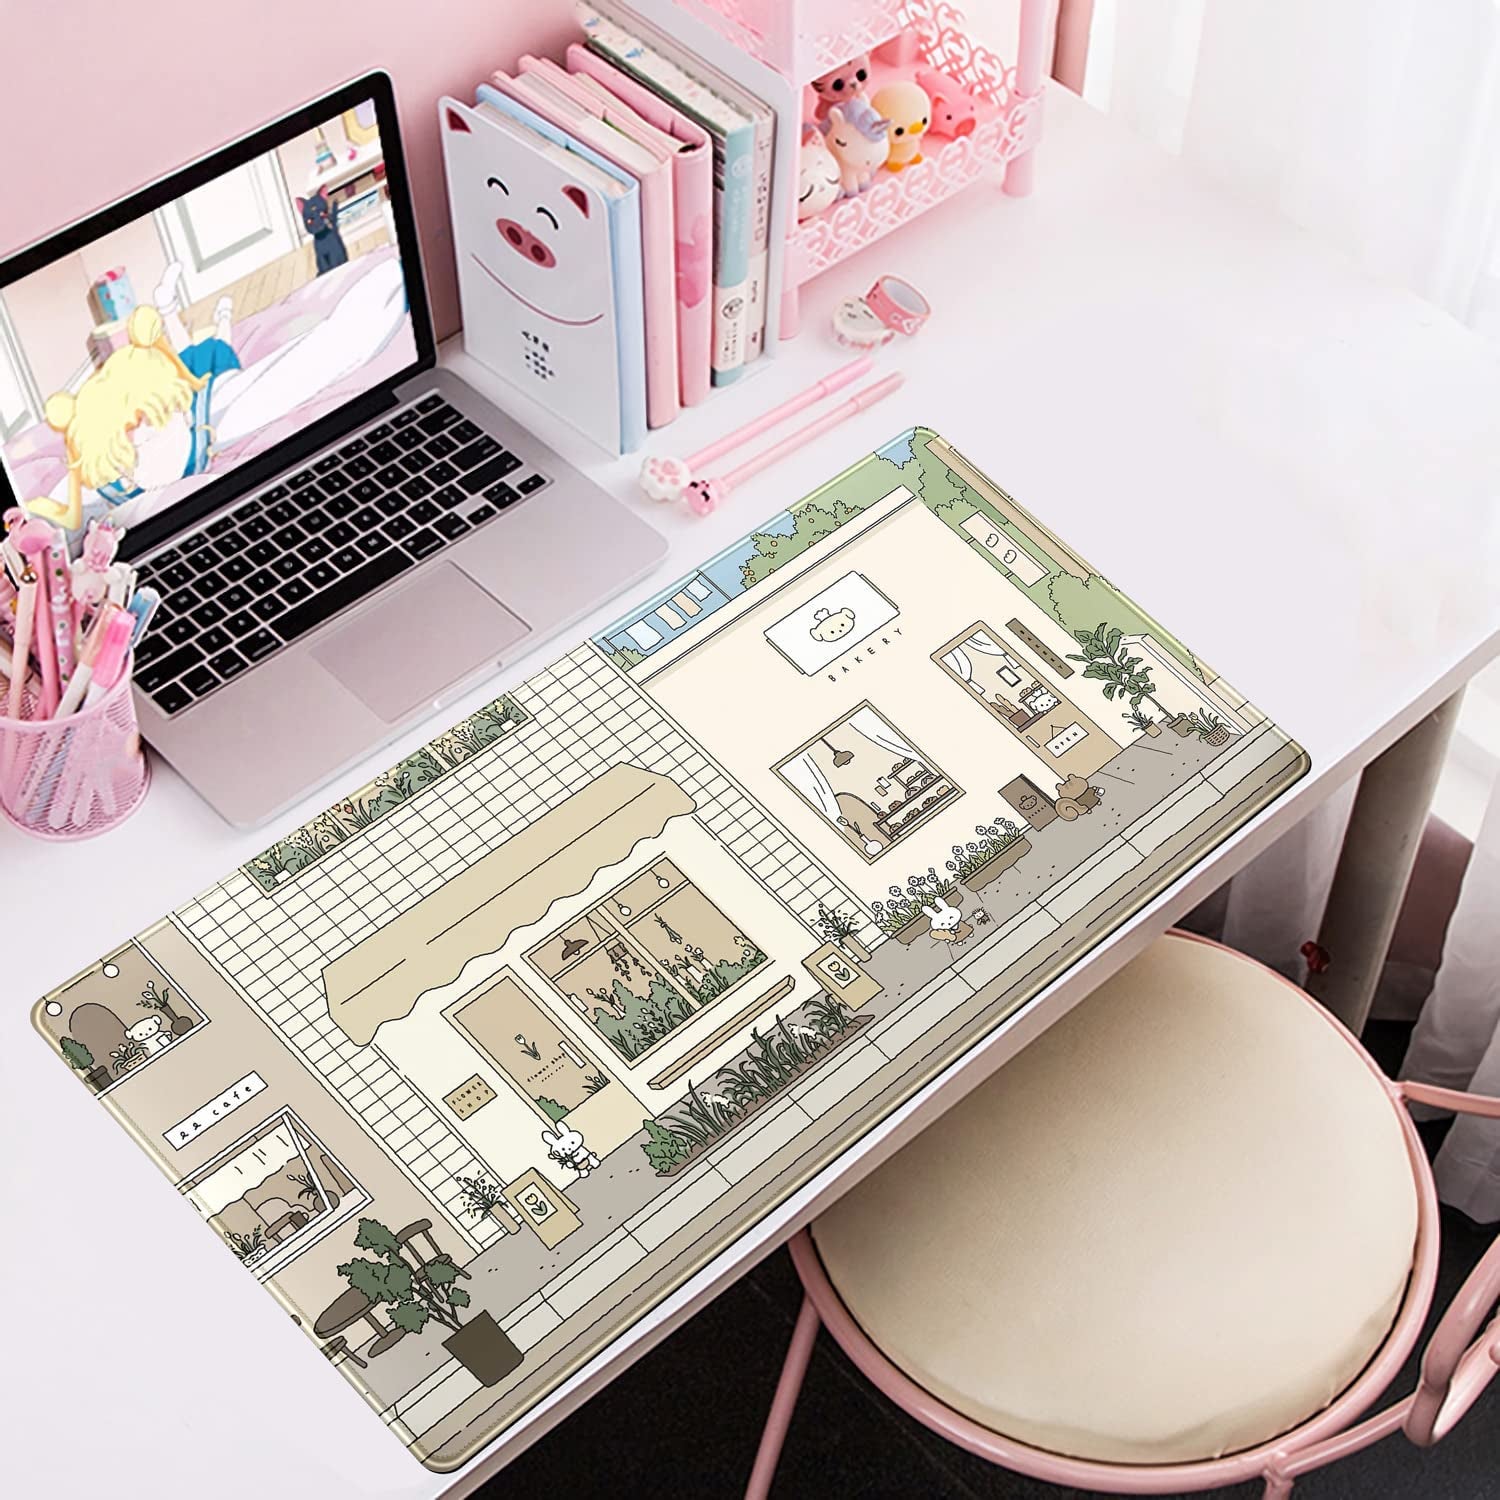 a desk pad with a cute illustration on it of a bakery, coffee shop, and florist.